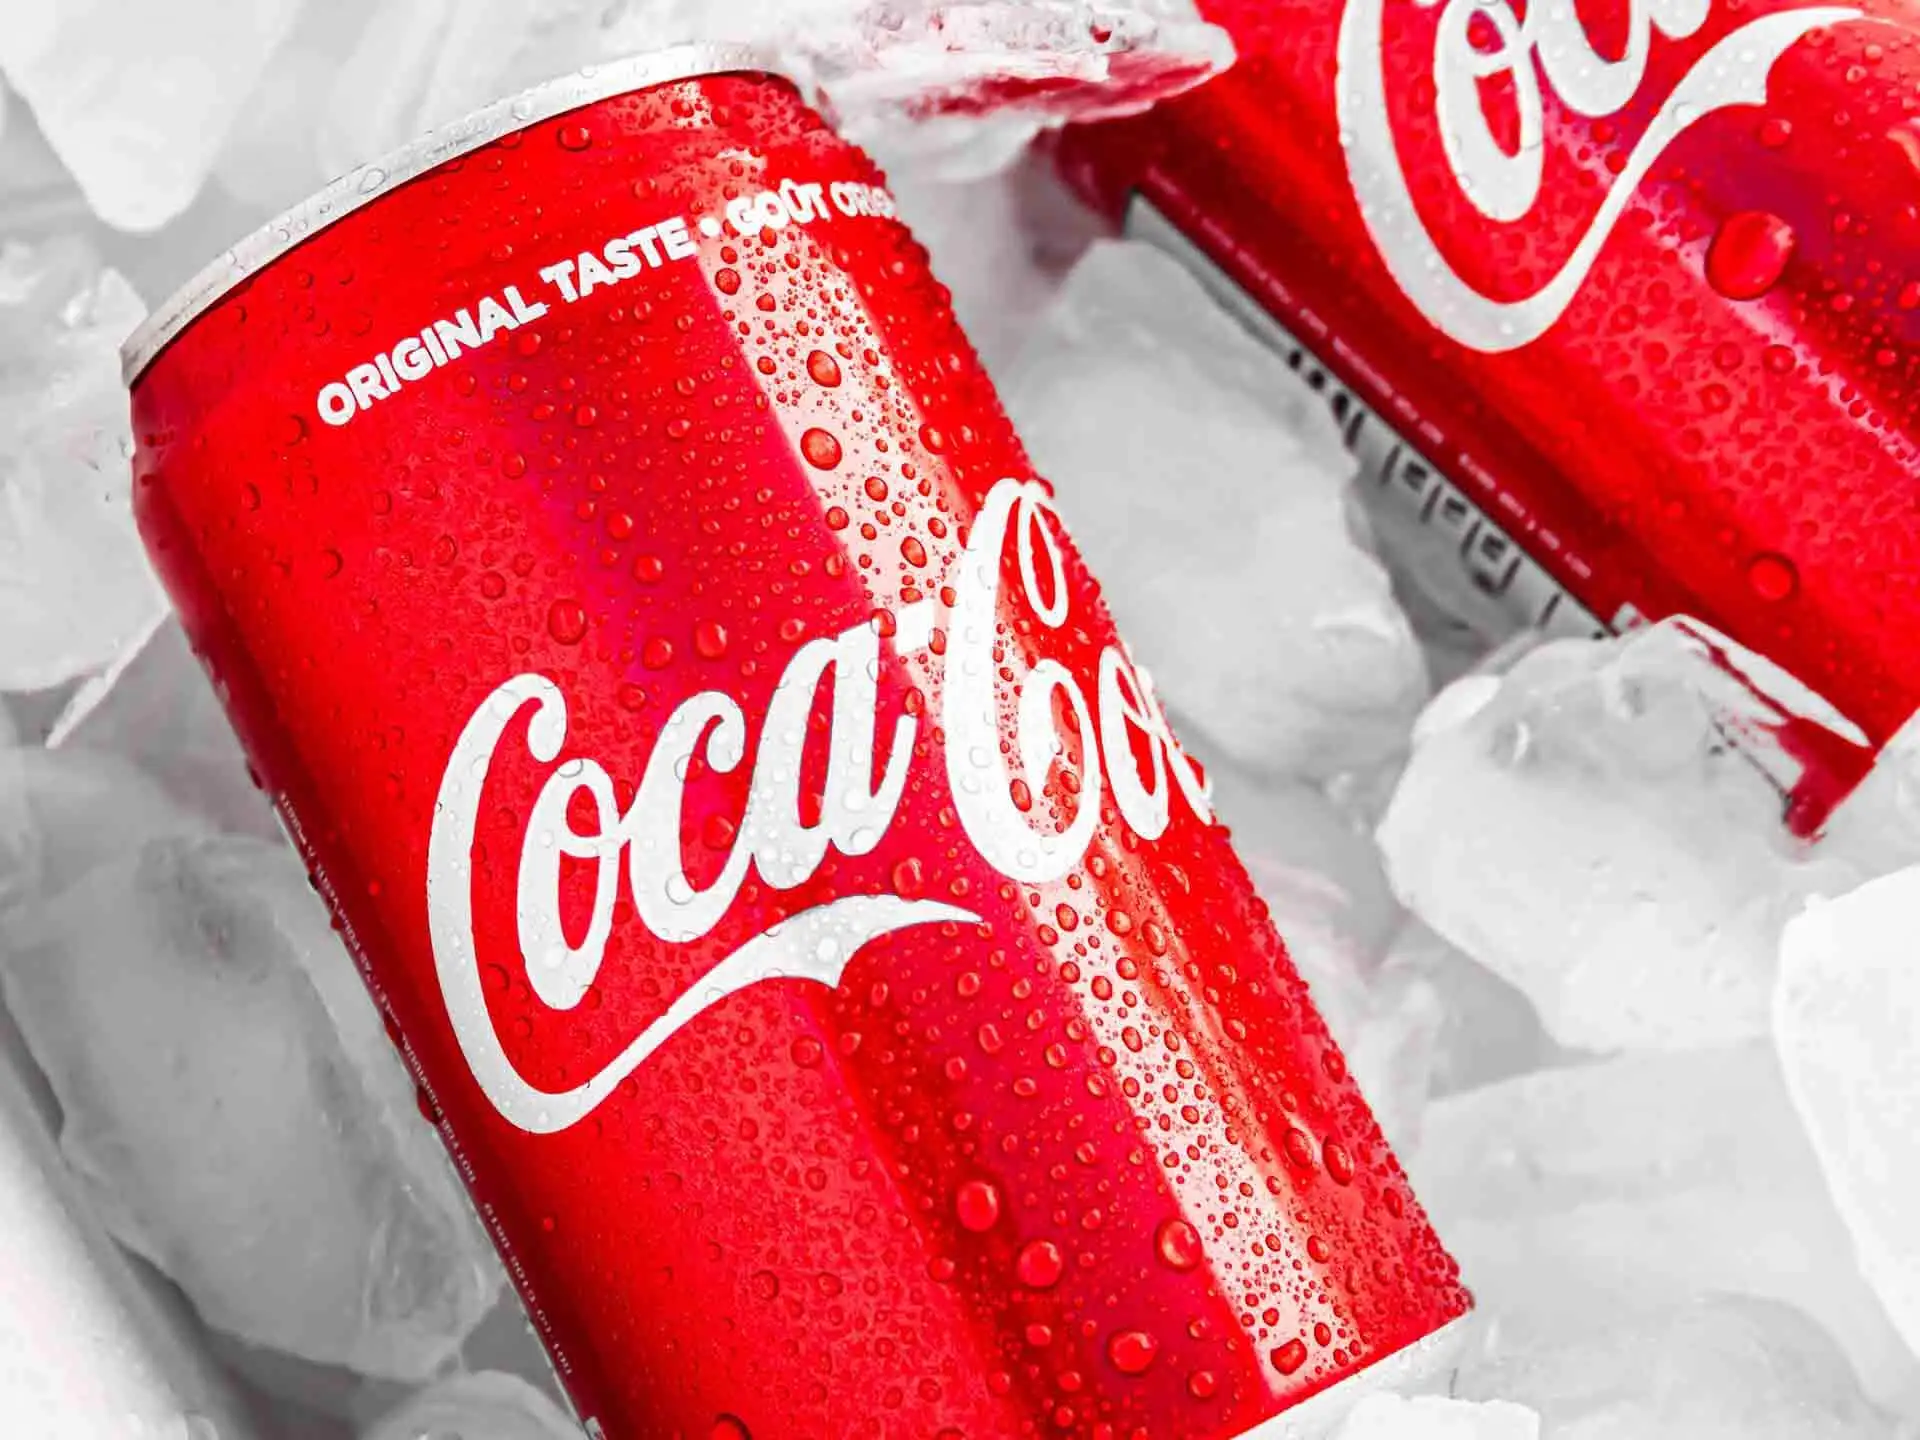 Cans of Coca Cola on white plastic pack as iconic and successful branding sample